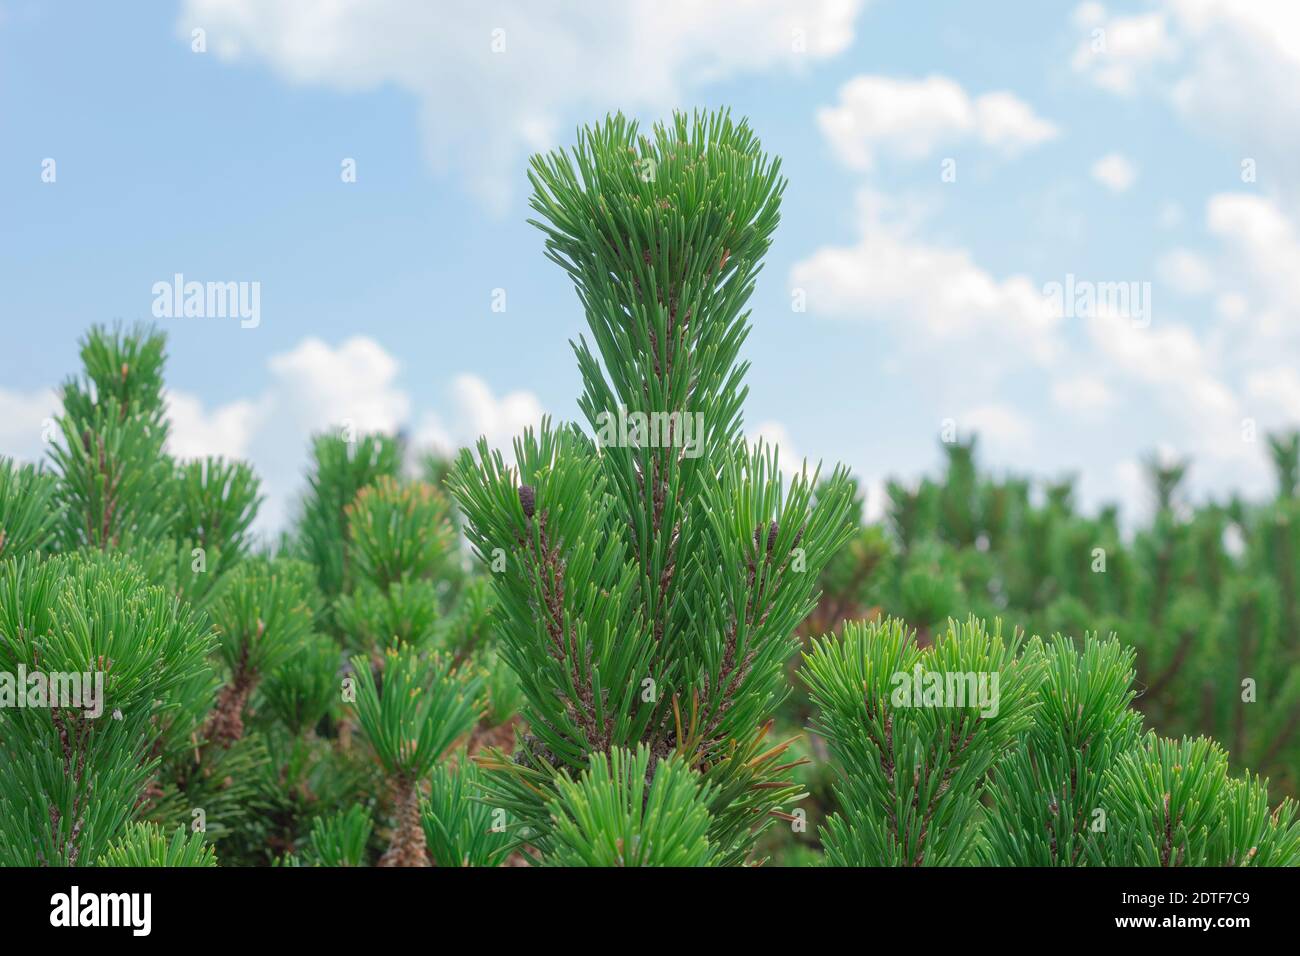 Pine branches against a blue sky. Pine forest side view Stock Photo